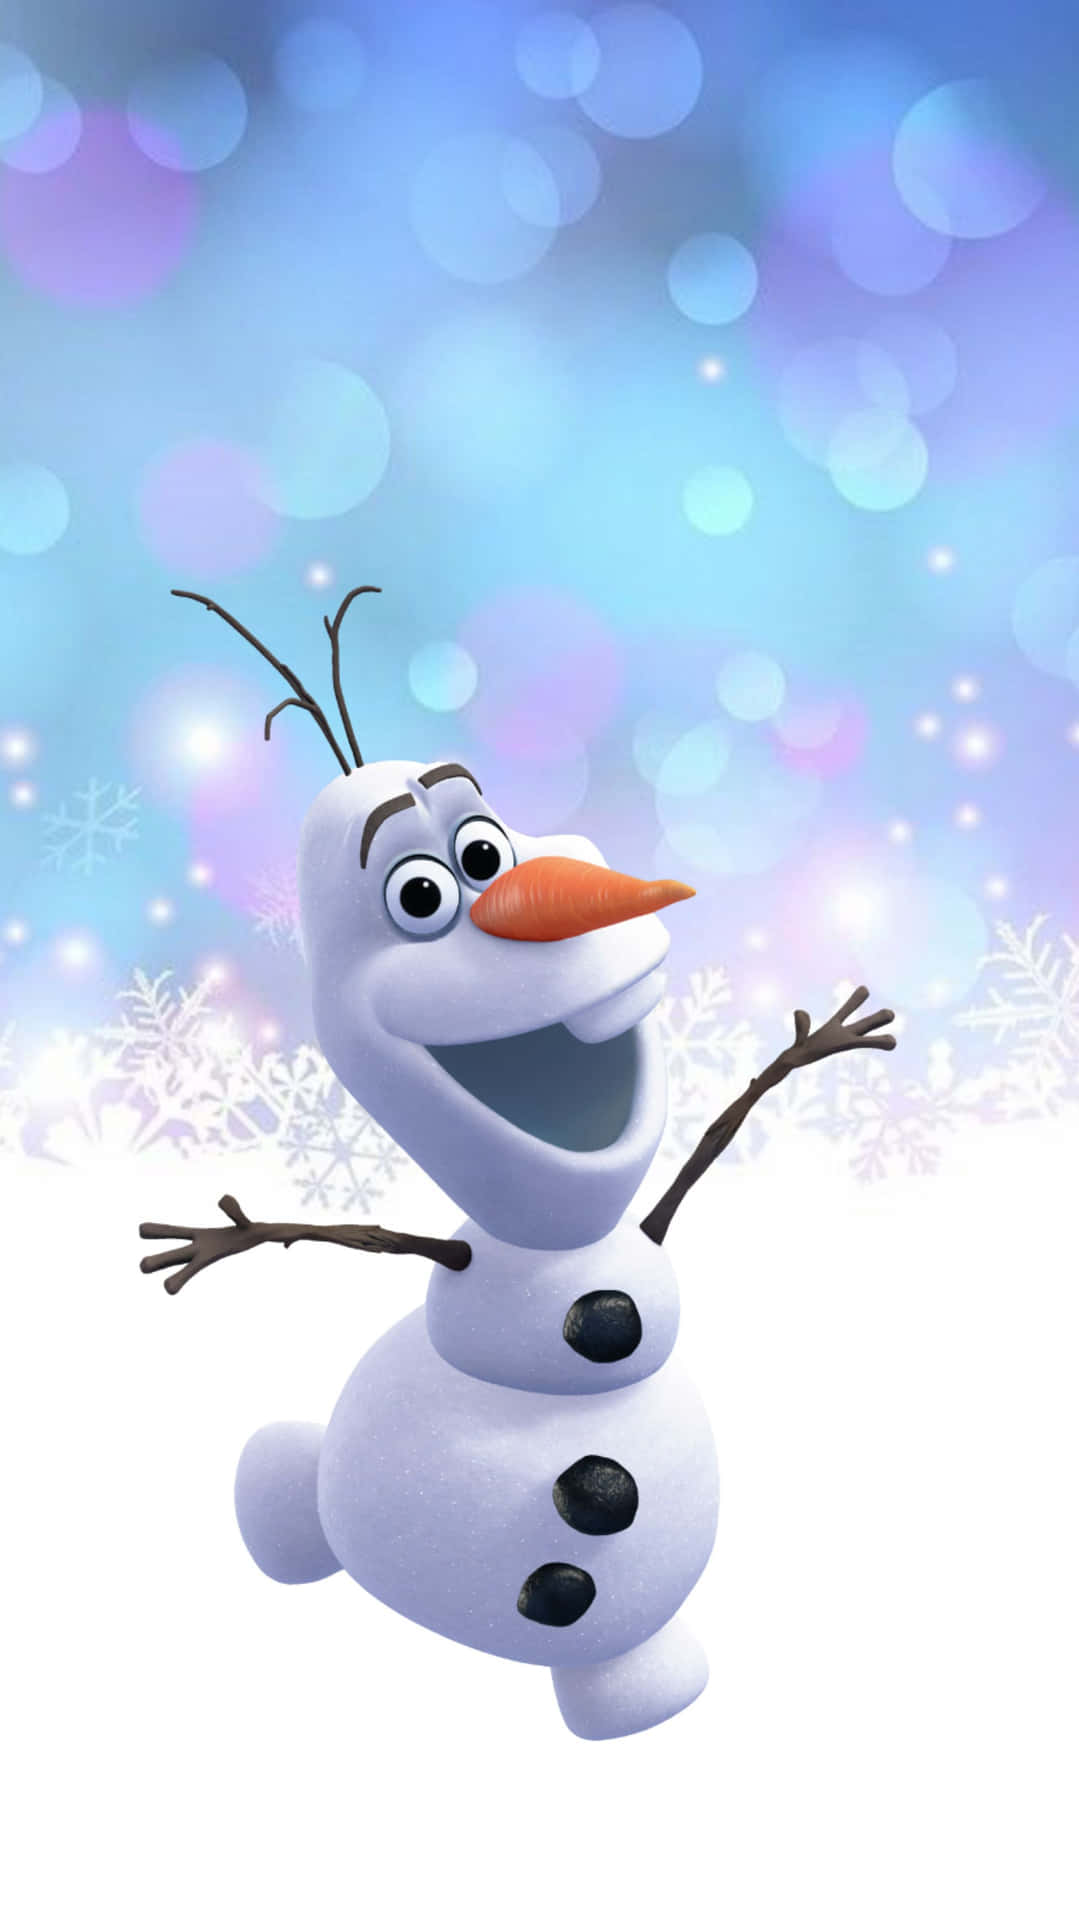 Download Olaf, Disney's beloved snowman, is ready to make you smile ...